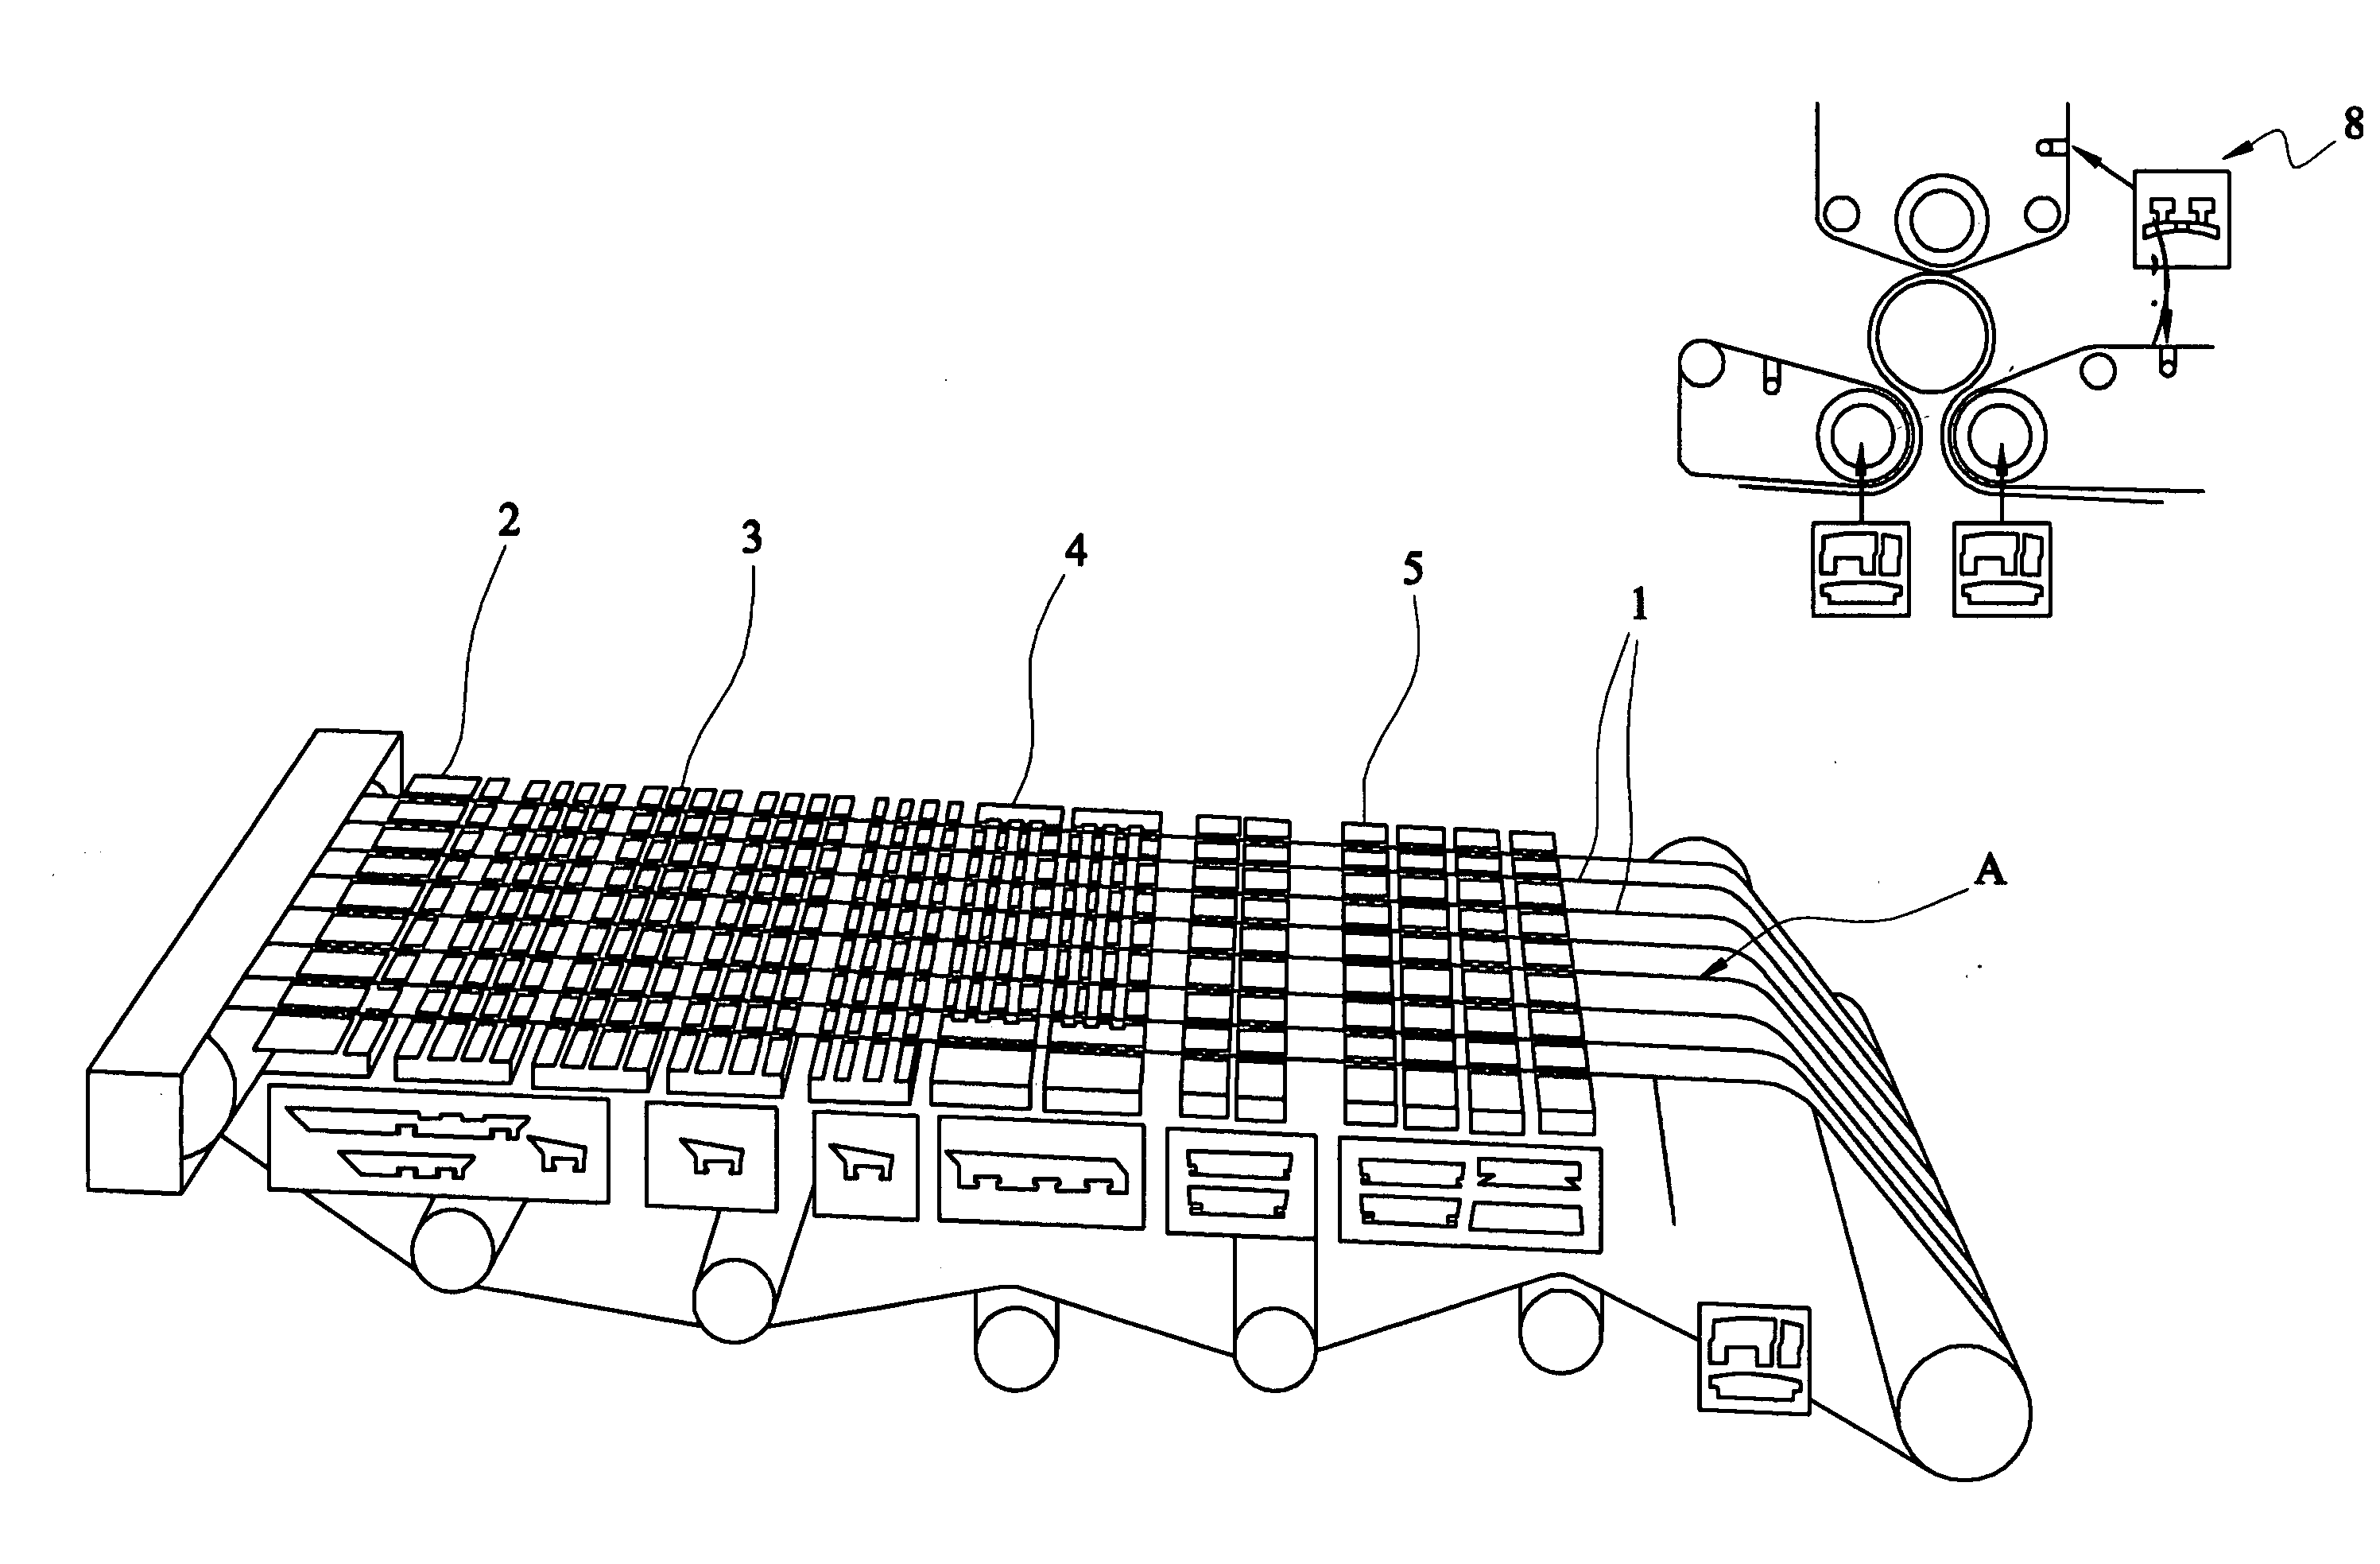 Papermaking apparatus